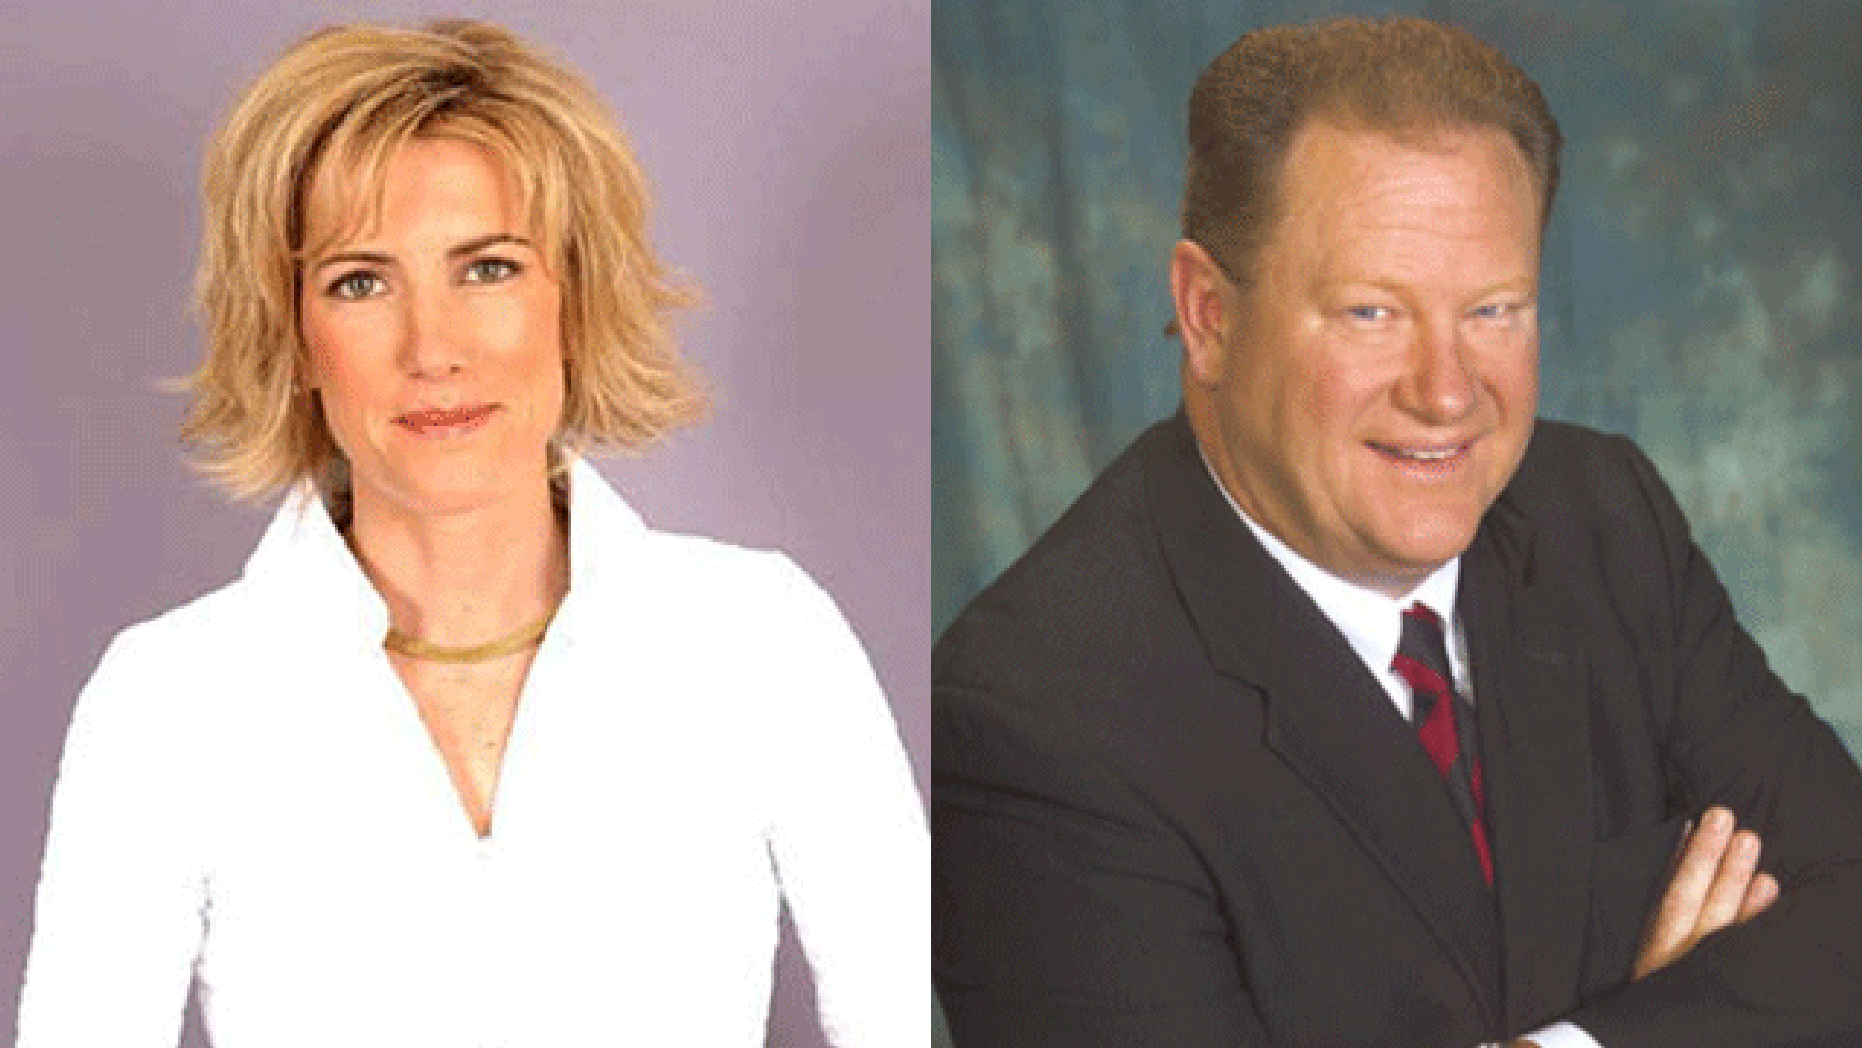 MSNBC's Ed Schultz Off Air Indefinitely After Calling Radio Host Laura Ingraham a ...